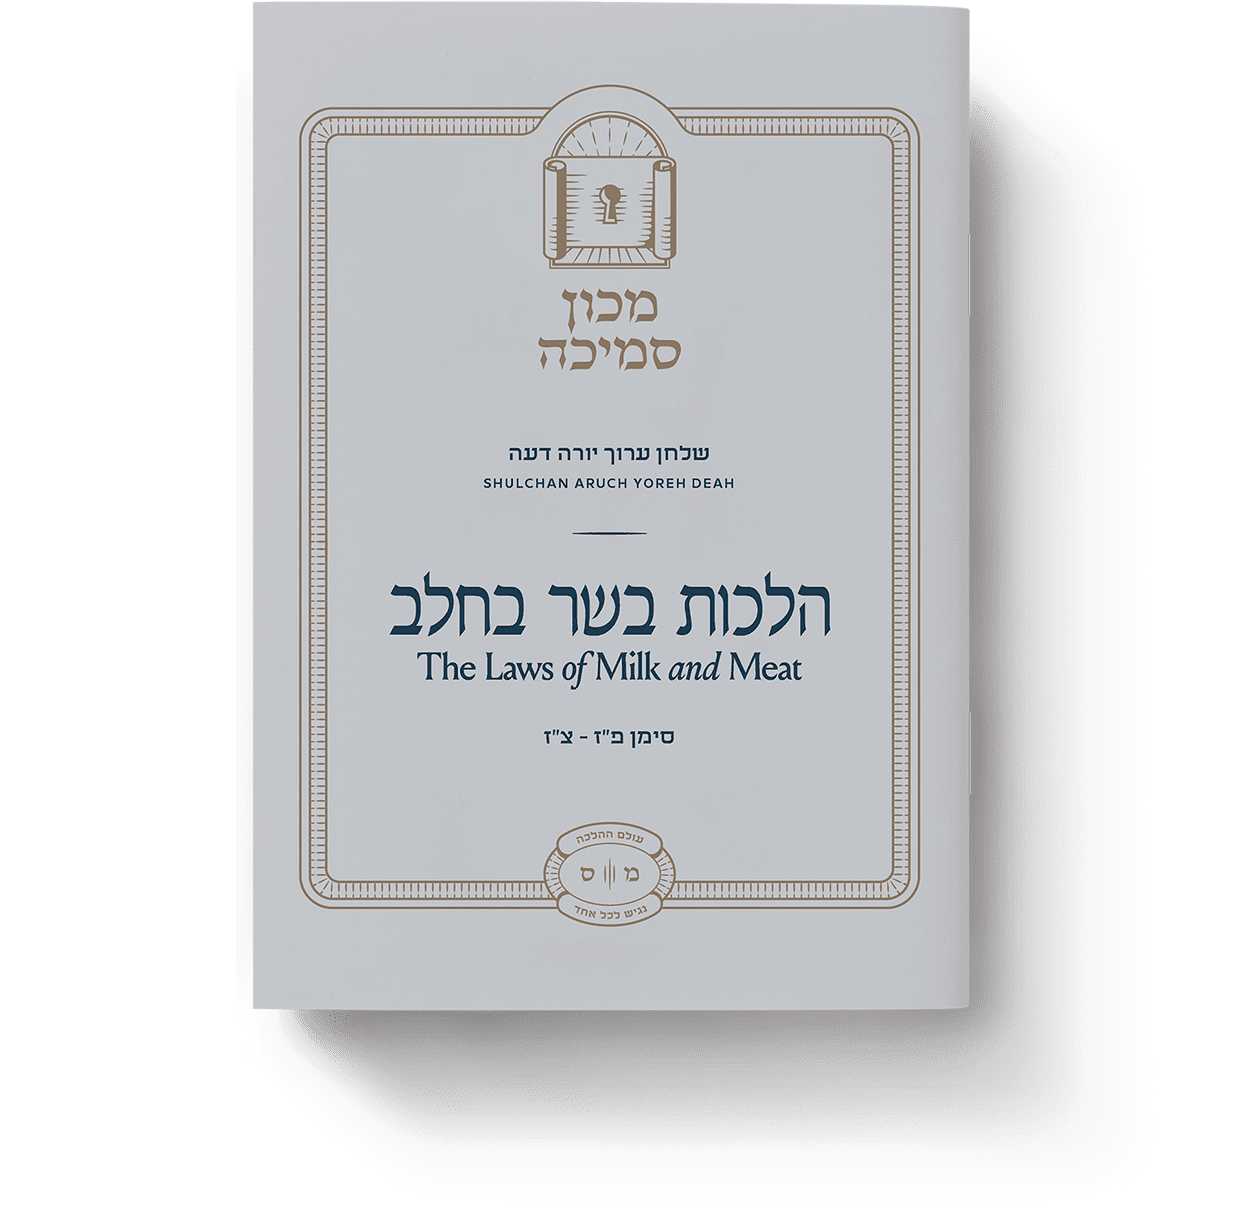 1. Hilchos Basar B’chalav (The Laws of Meat and Milk)


שלחן ערוך יורה דעה סימנים פ”ז - צ"ז

The source and scope of the prohibition, waiting times between meat and milk, meat and milk mixtures, na”t bar na”t, sharp foods and knives, and other discussions.